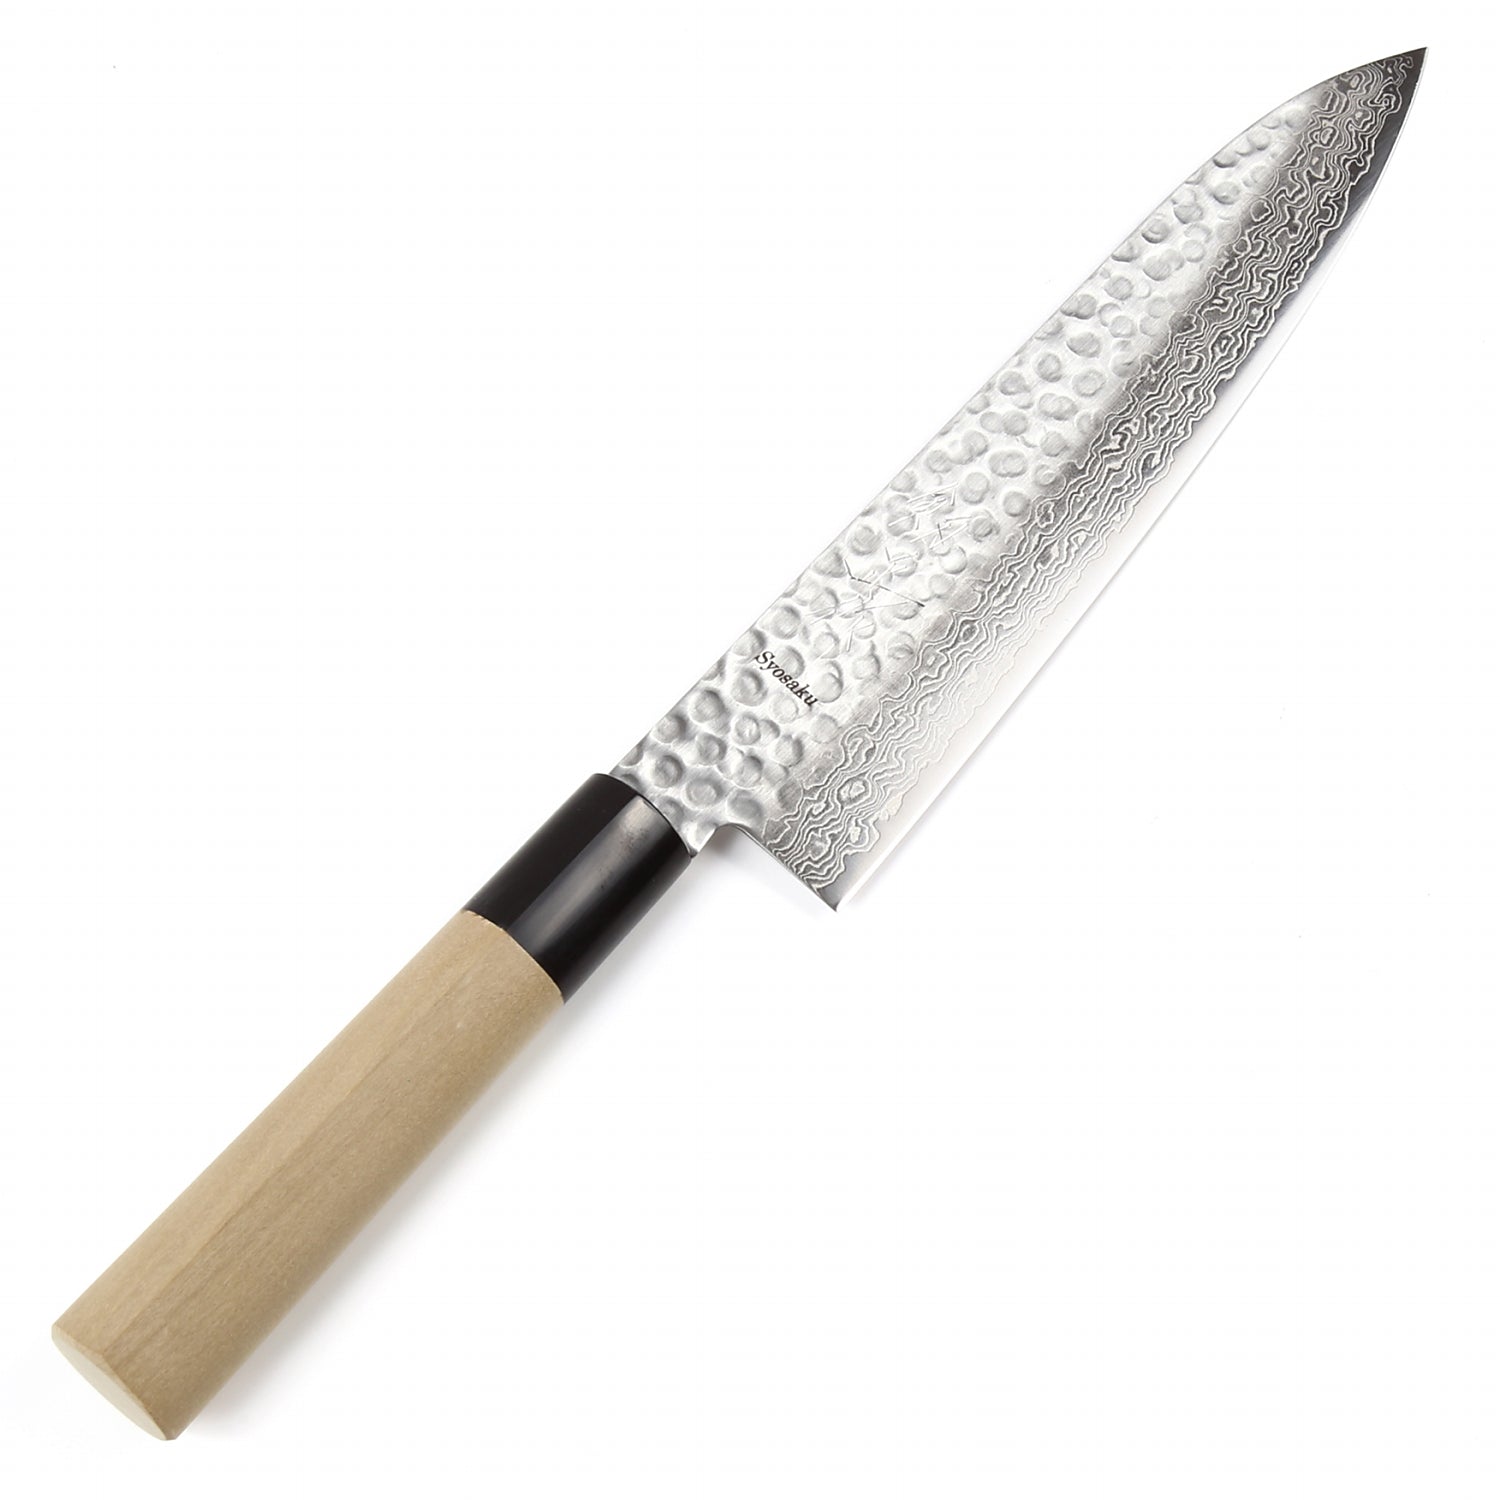 KEEMAKE Deba Knife 6 inch, Double Bevel Japanese 440C Stainless Steel  Fish/Fillet Knife with G10 Bolster Octagonal Wood Handle